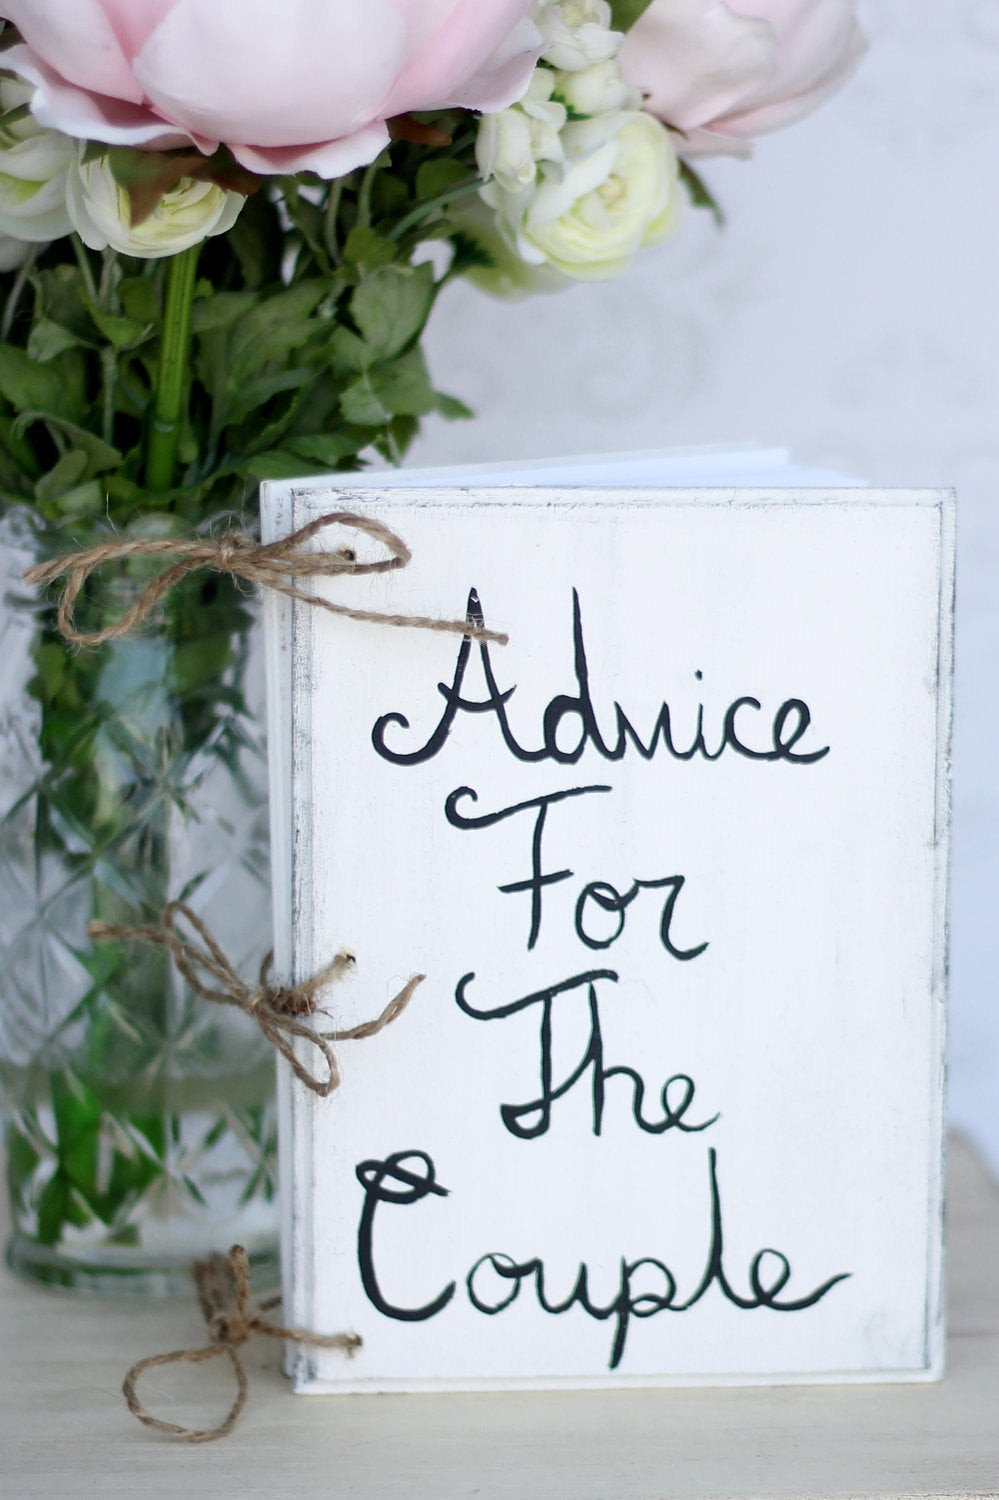 Shabby Chic Wedding Guest Book
 Wedding Guest Book Advice For The Couple Shabby Chic Decor